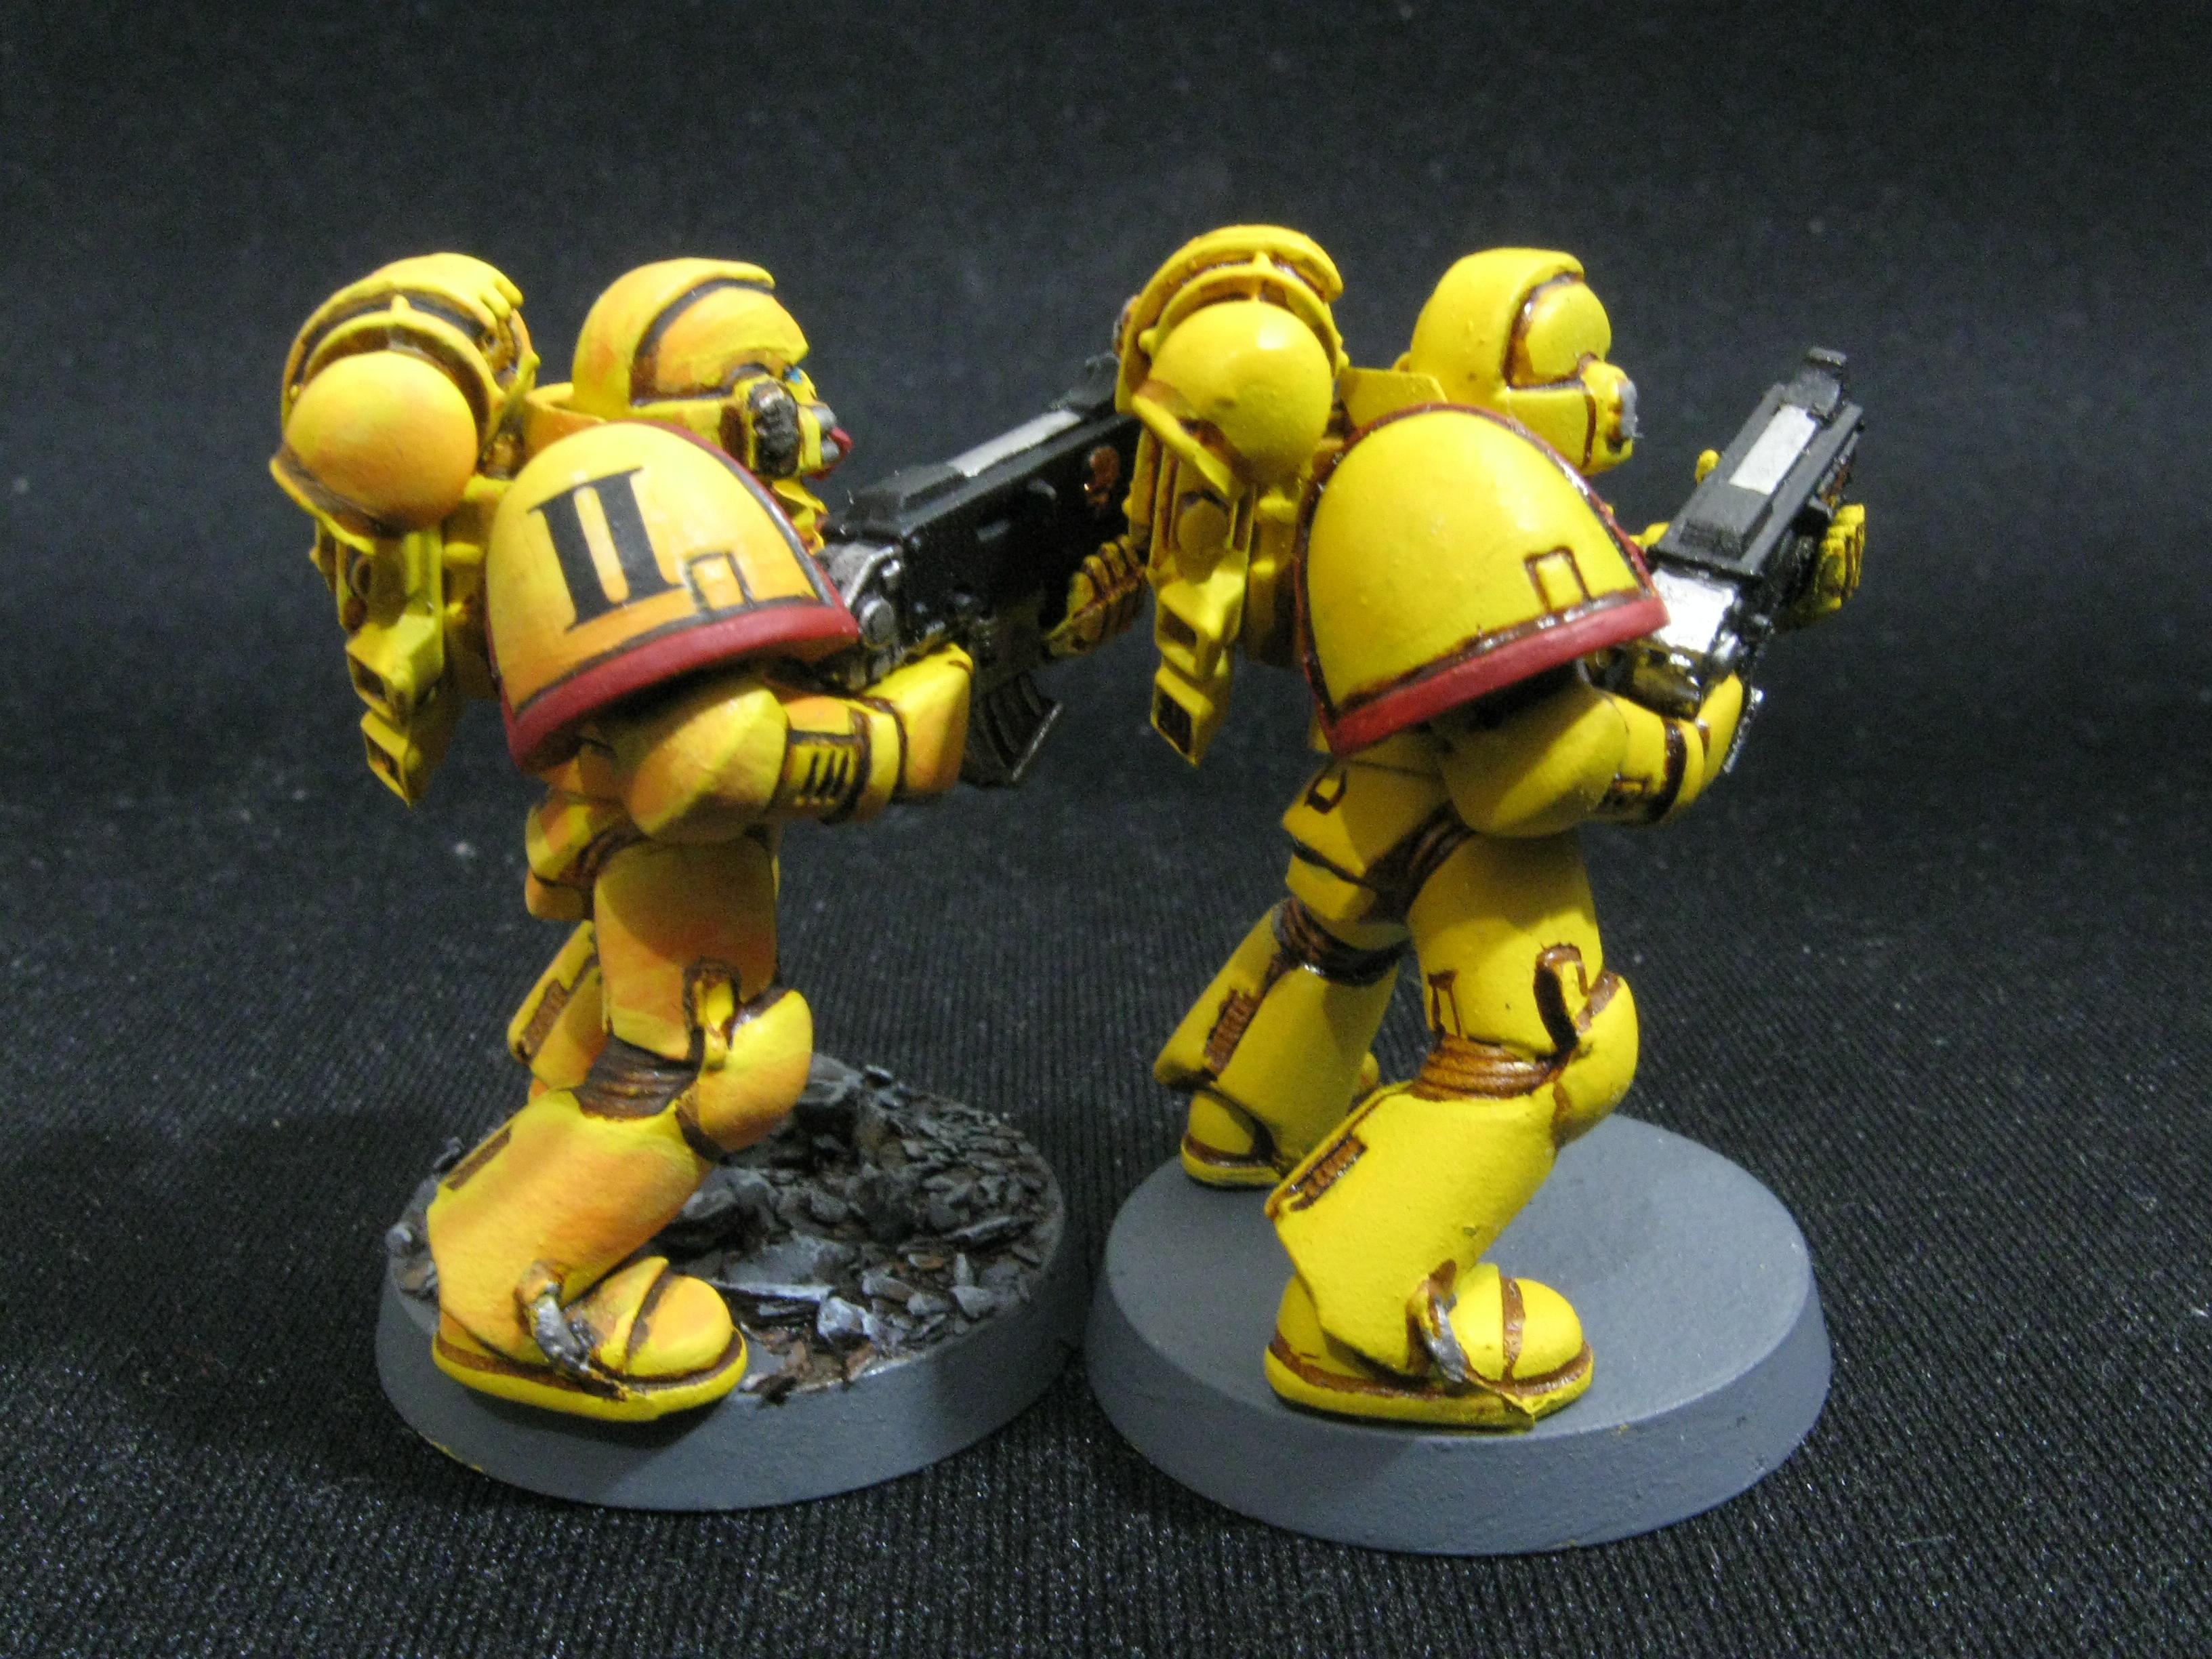 Imperial Fists, Space Marines, Warhammer 40,000, Yellow